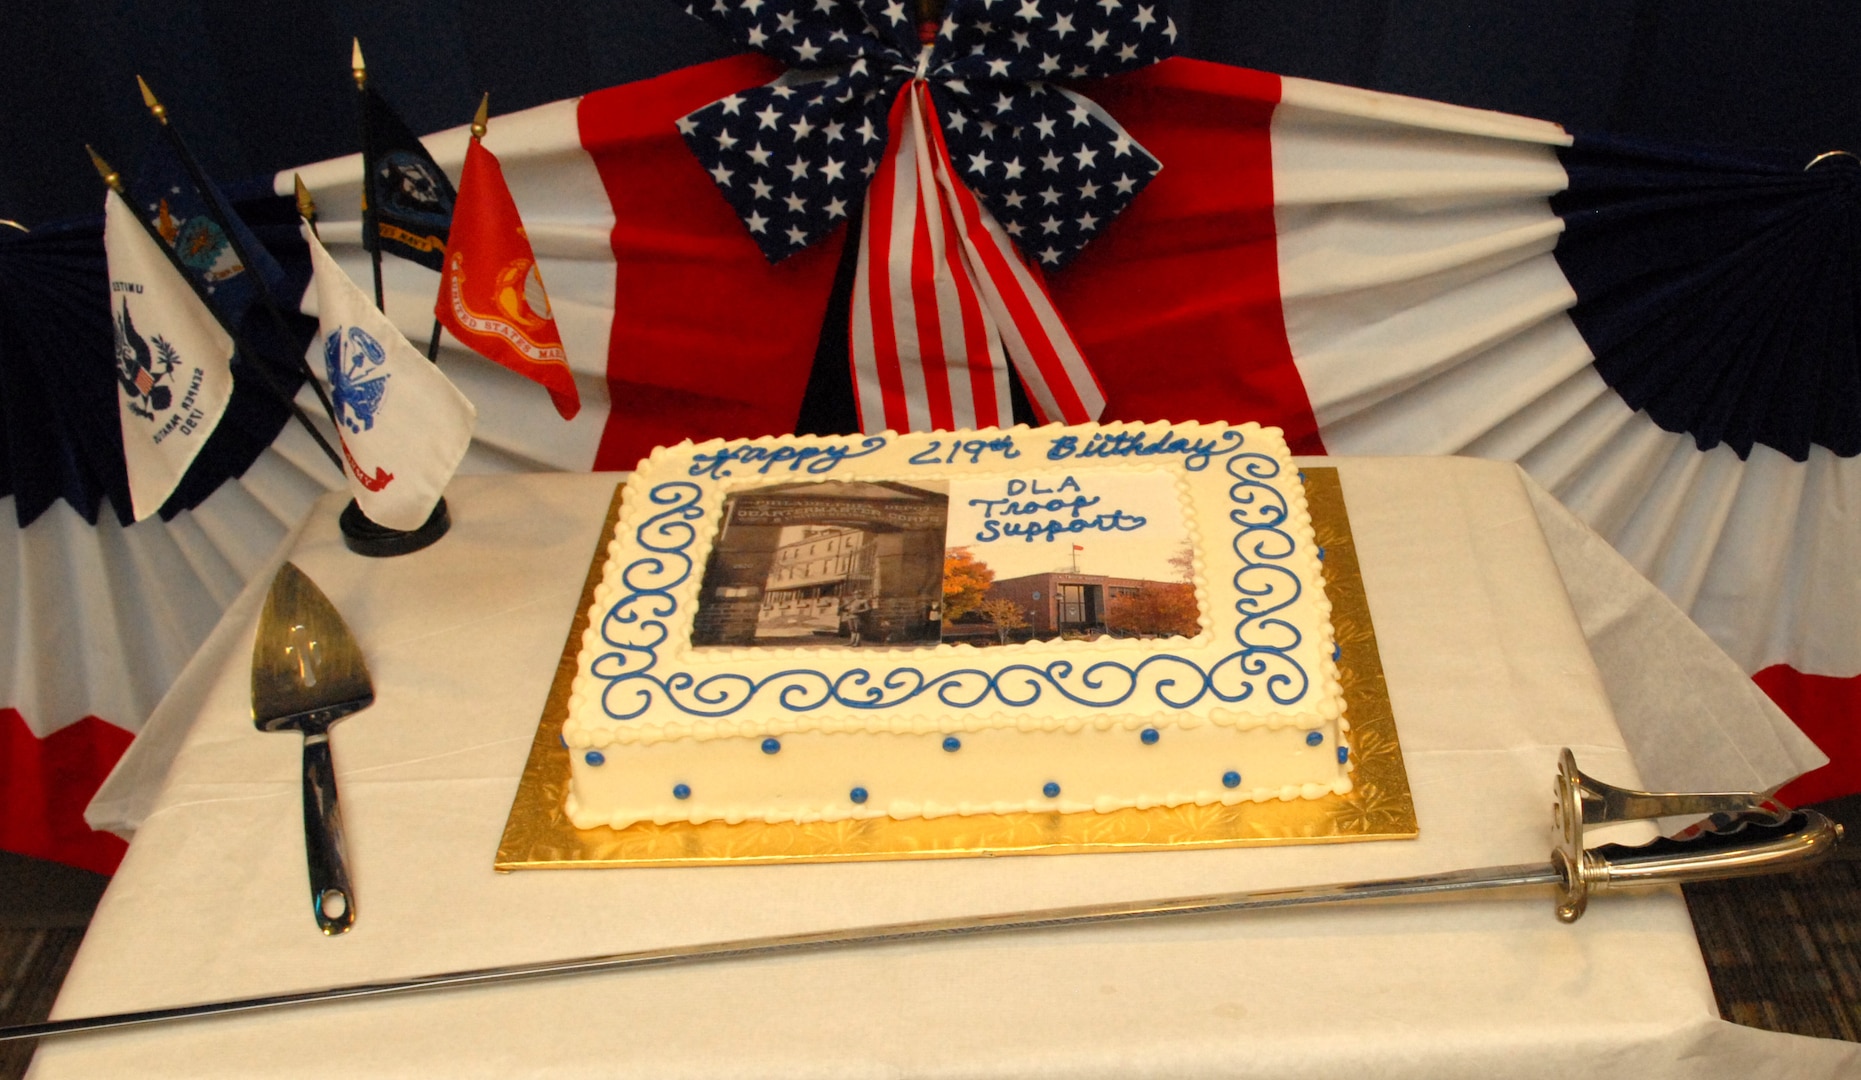 Pictures of the original Schuylkill Arsenal and the current Defense Logistics Agency Troop Support headquarters adorn the cake for the celebration of Troop Support's 219th birthday in Philadelphia June 6. Photo by Ed Maldonado.